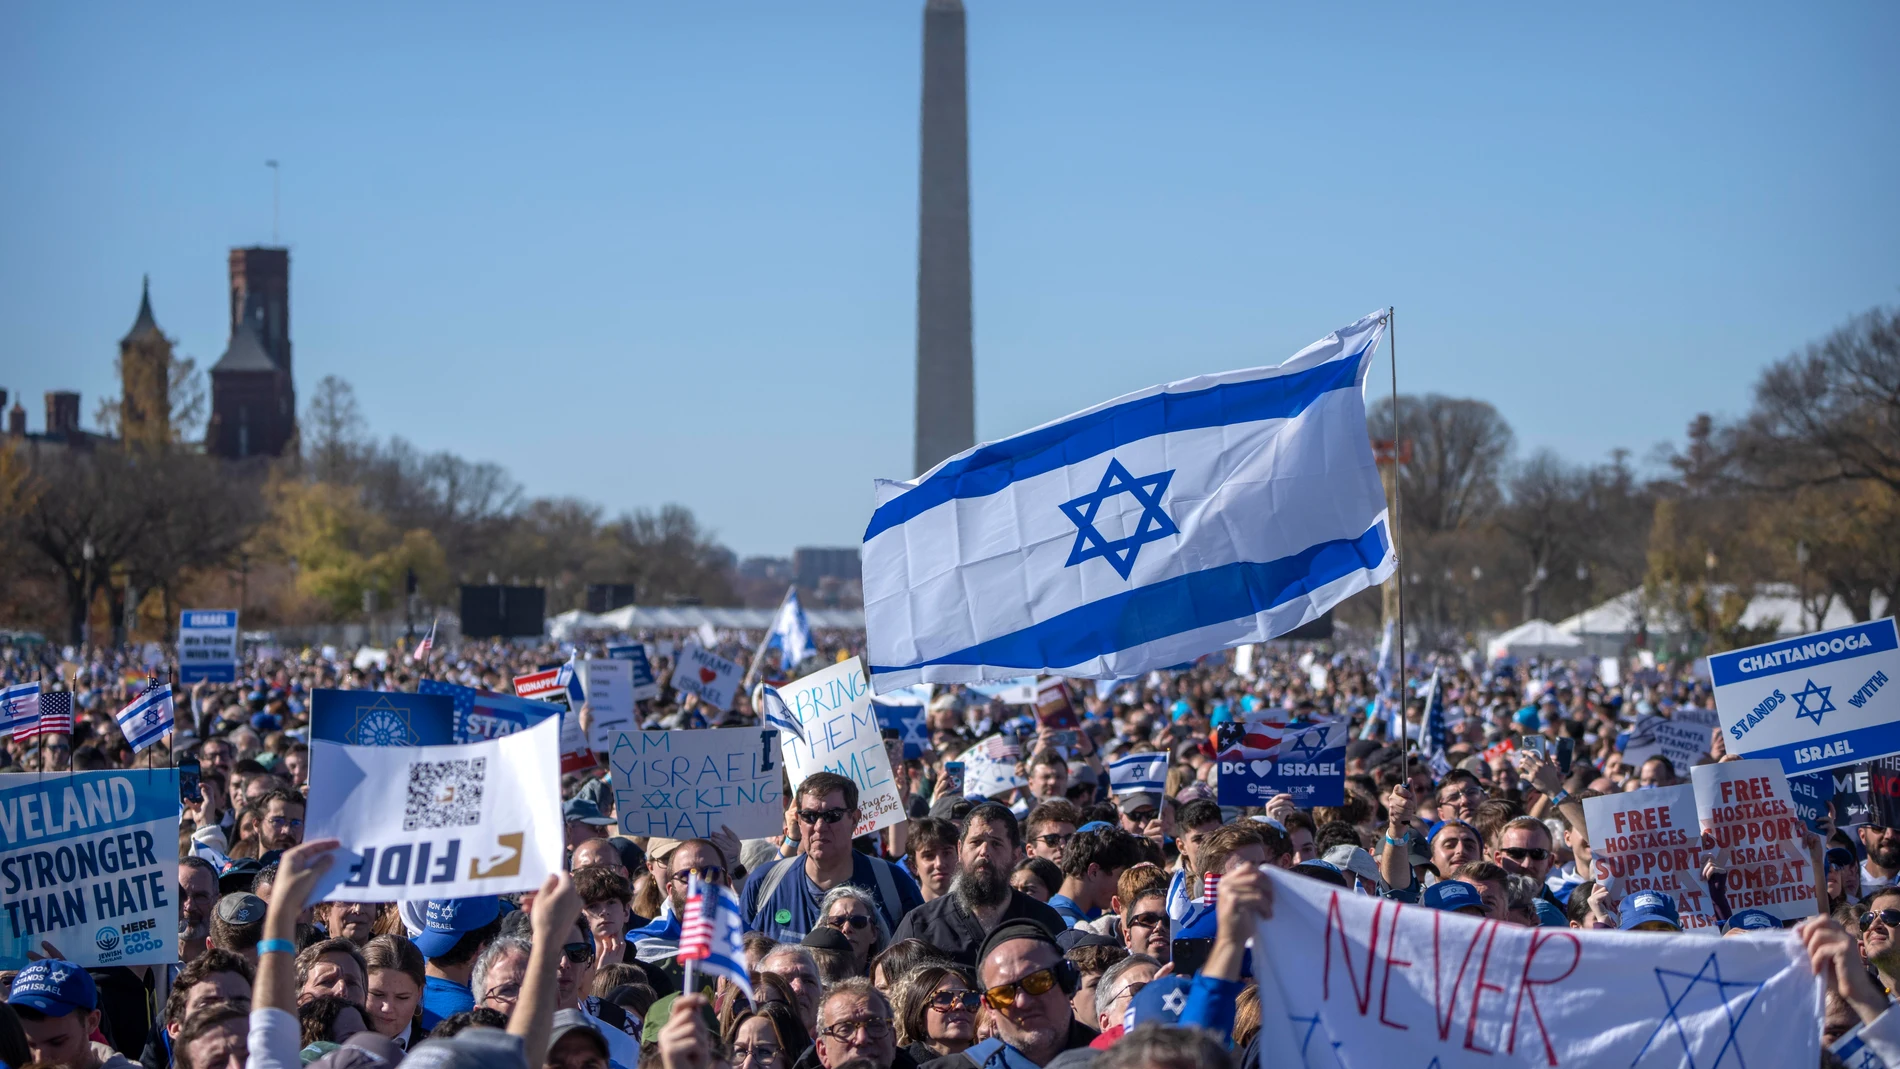 Crowds of supporters gather on the National Mall at the March for Israel on Tuesday, Nov. 14, 2023, in Washington. (AP Photo/Mark Schiefelbein)